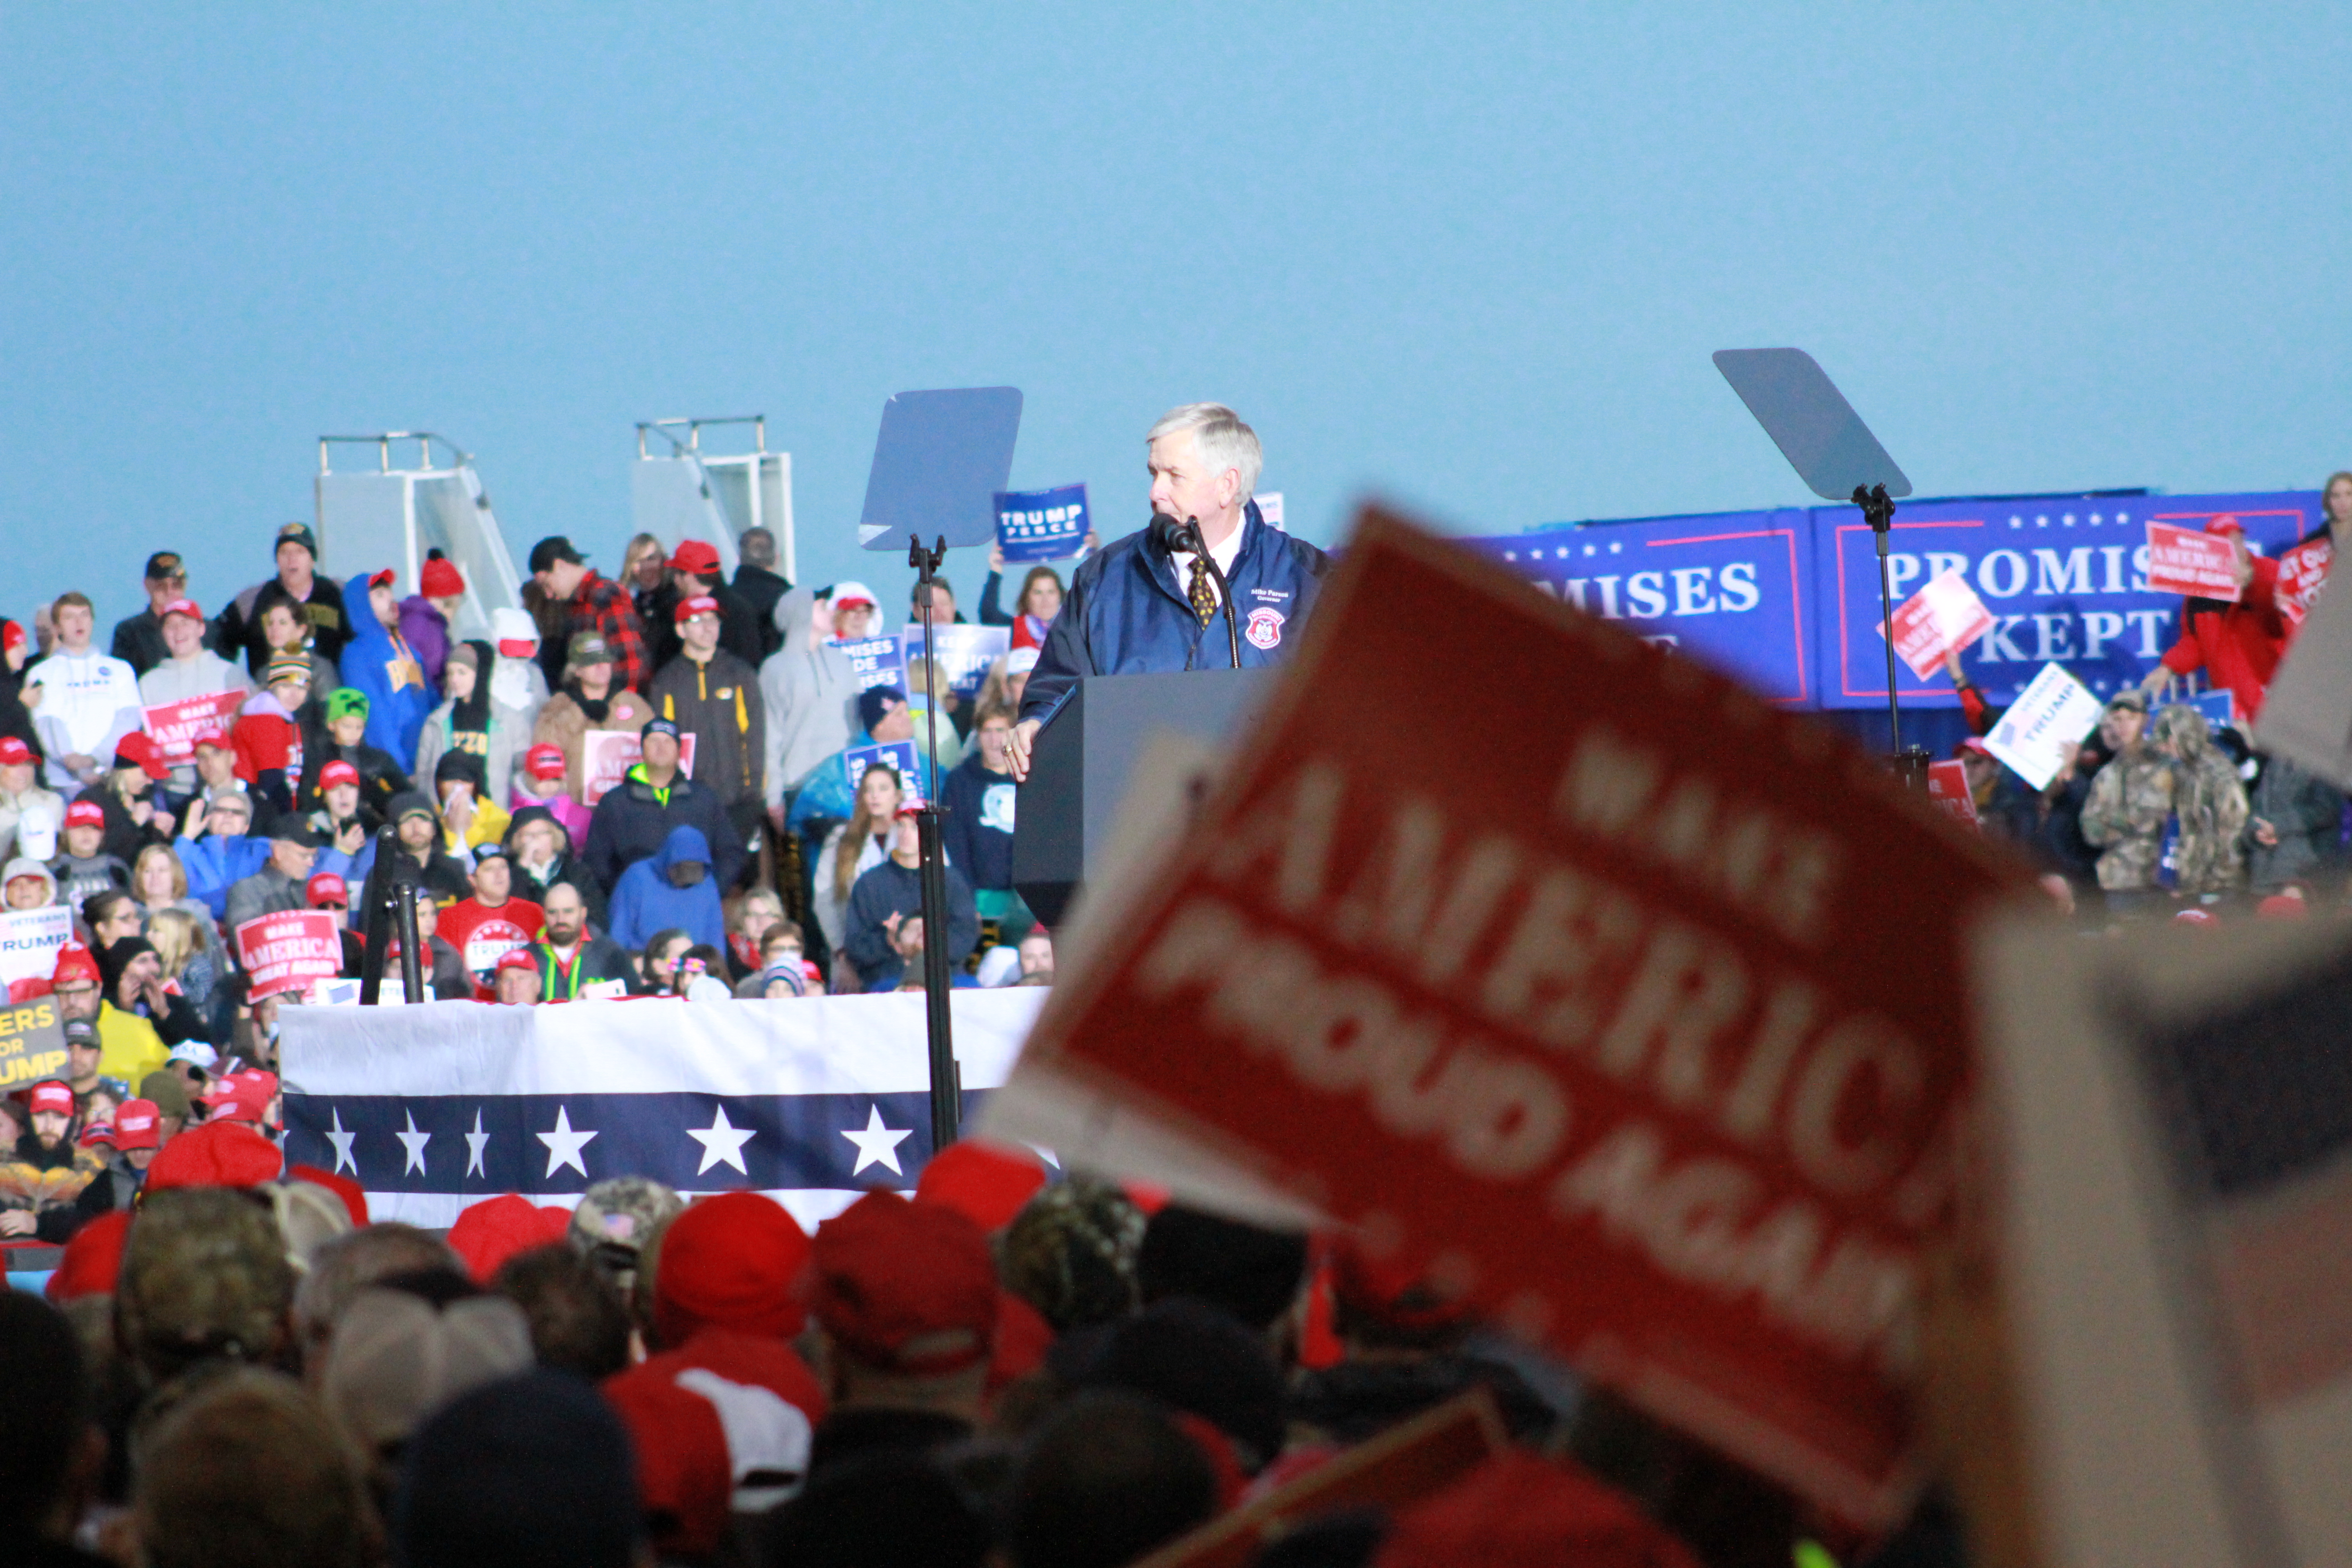 Gov. Mike Parson speaks ahead of President Donal Trump's arrival at a campaign rally (ALISHA SHURR/THE MISSOURI TIMES.)